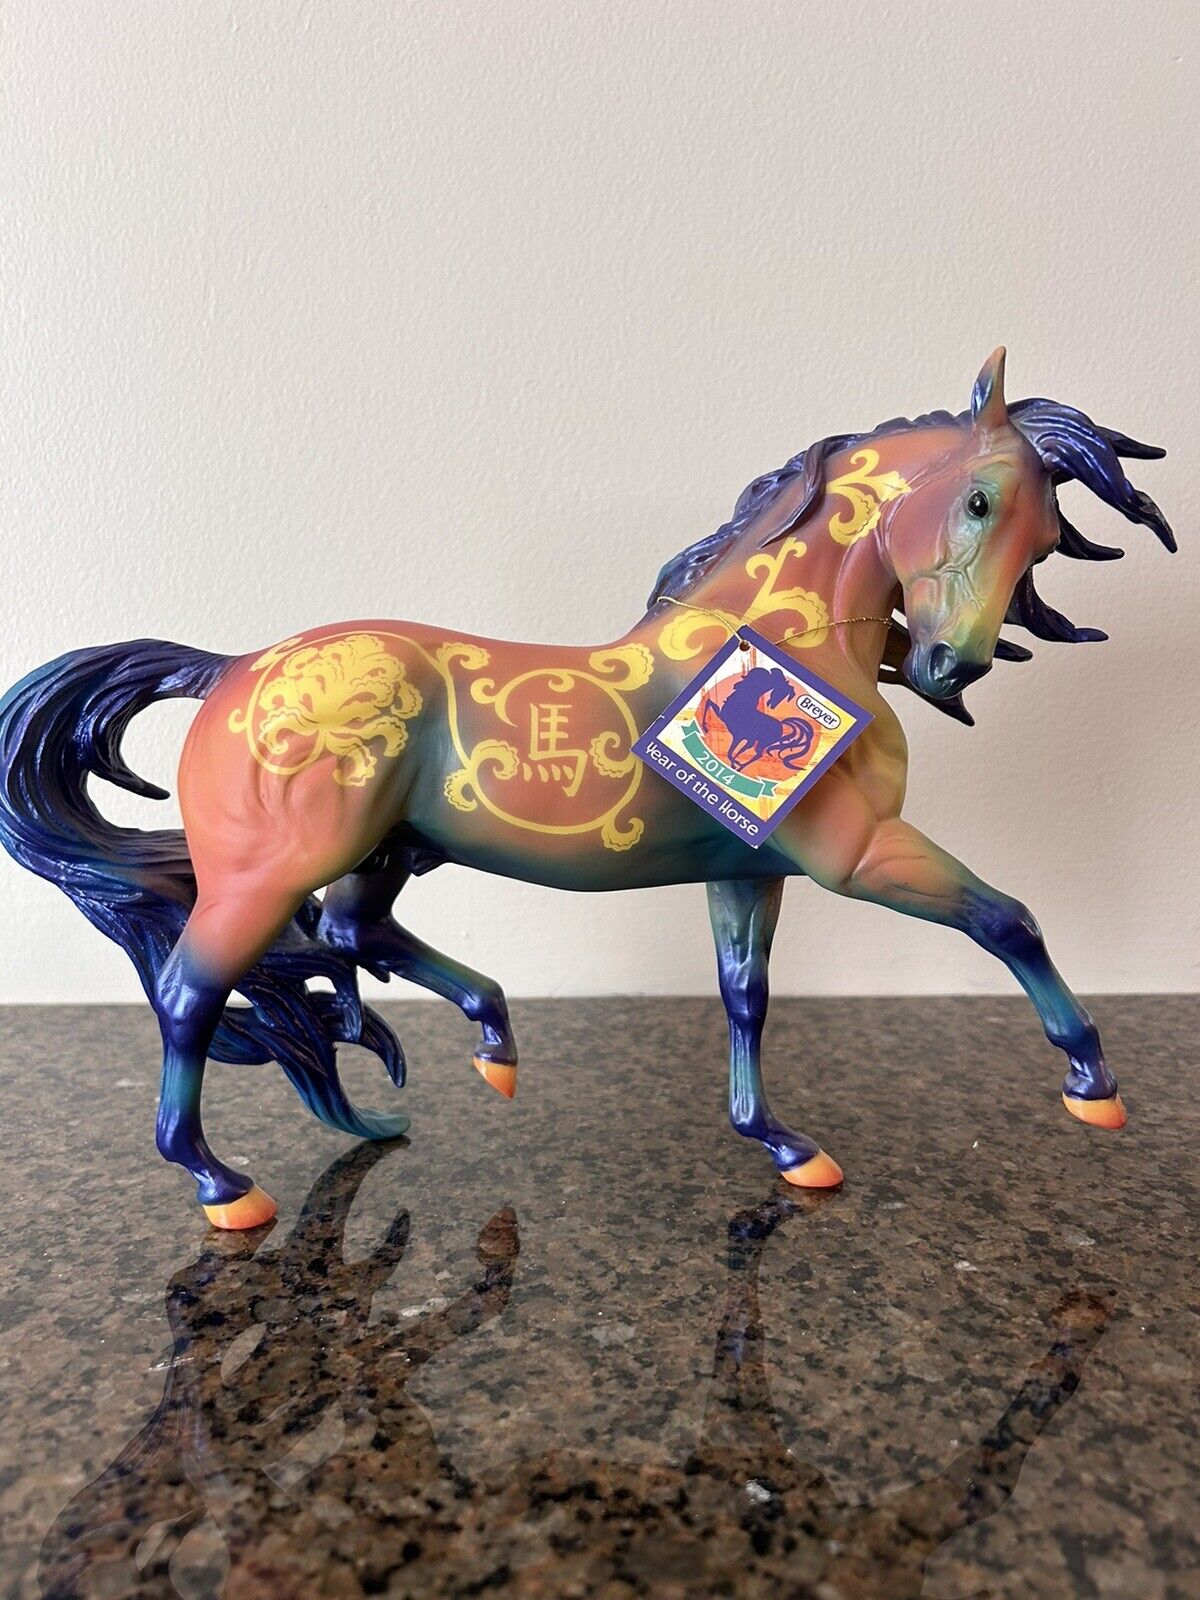 Breyer Traditional Chinese Horse Of The Year 2014 with tag